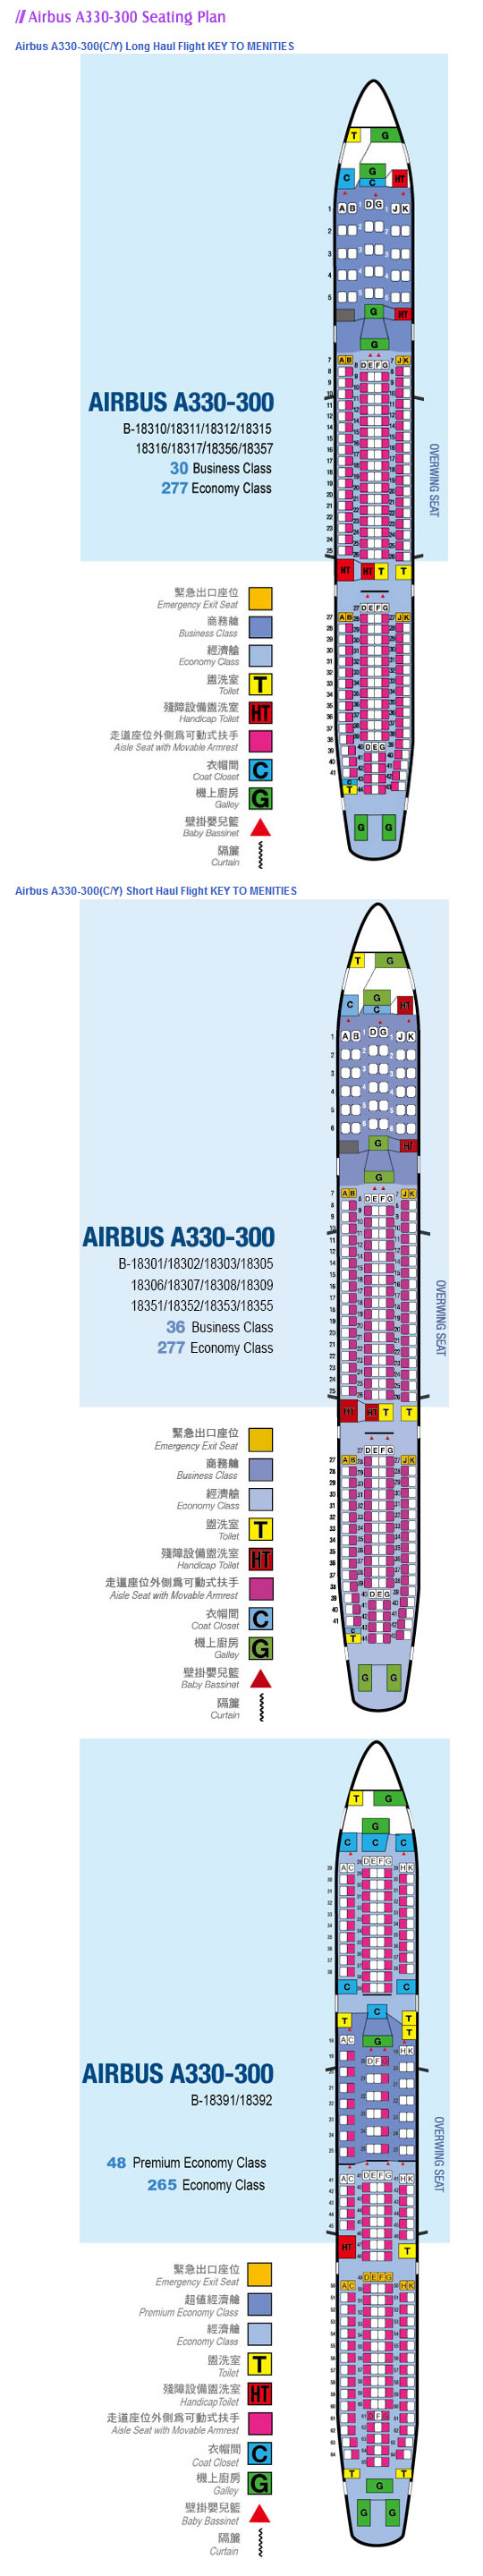 CHINA AIRLINES AIRBUS A330 AIRCRAFT SEATING CHART